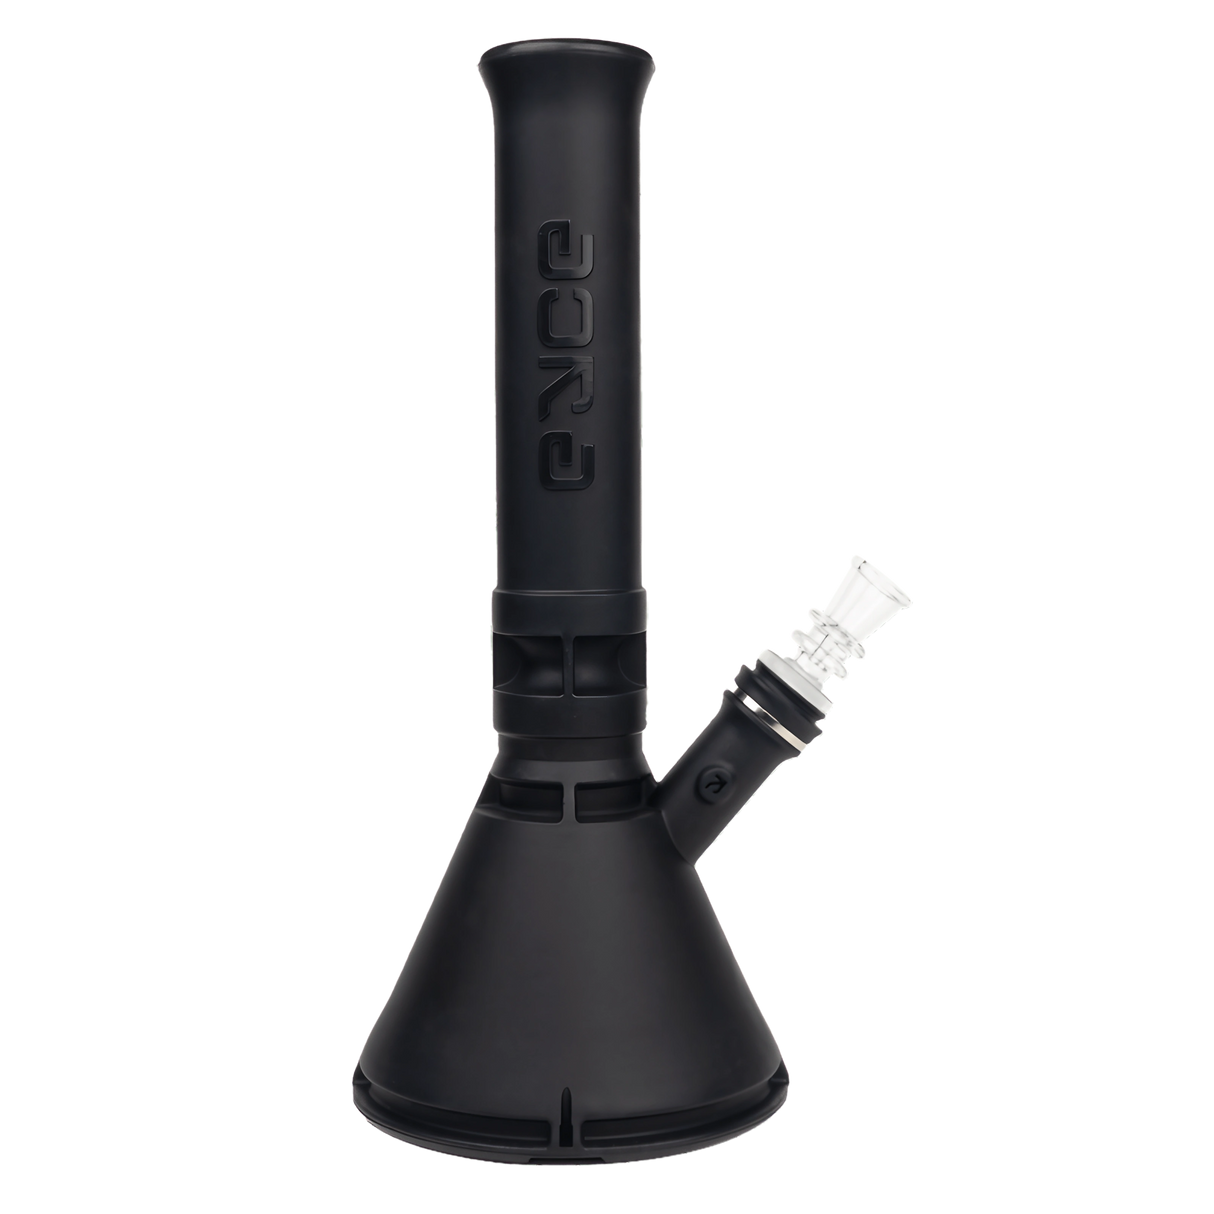 Eyce Beaker - Durable Silicone Bong in Matte Black - Front View with Slide Bowl